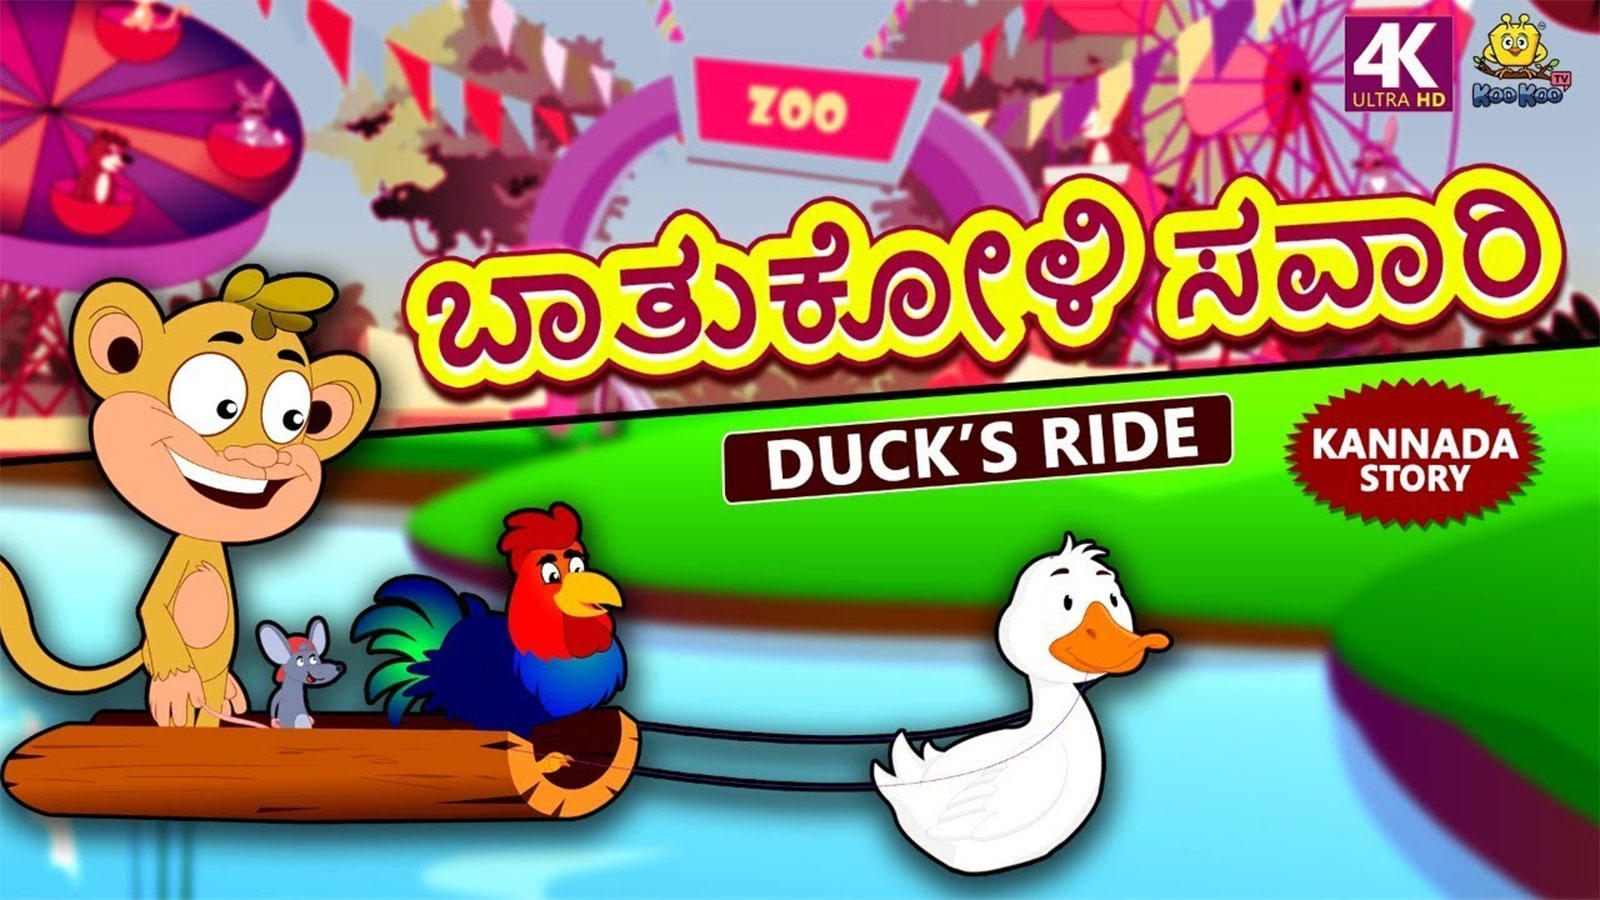 Watch Best Children Songs and Kannada Nursery Story 'Duck's Ride' for Kids  - Check out Children's Nursery Stories, Baby Songs, Fairy Tales and In  Kannada | Entertainment - Times of India Videos